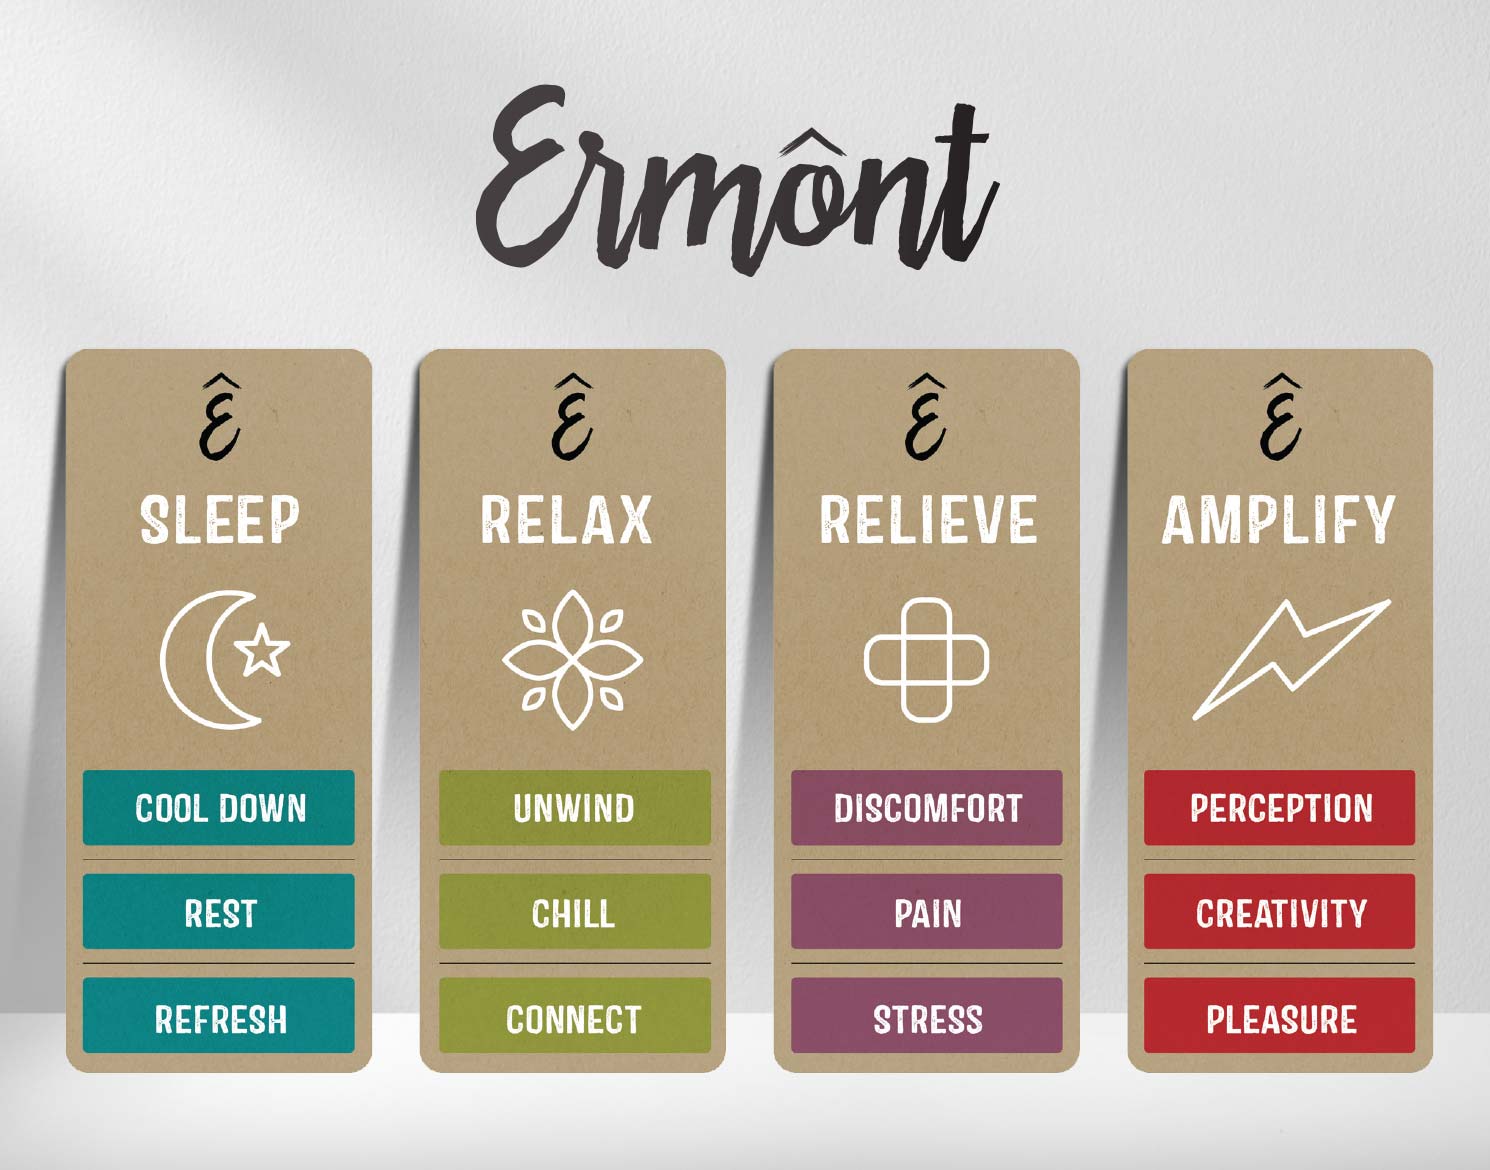 Ermont logo applied to signage with branded icons